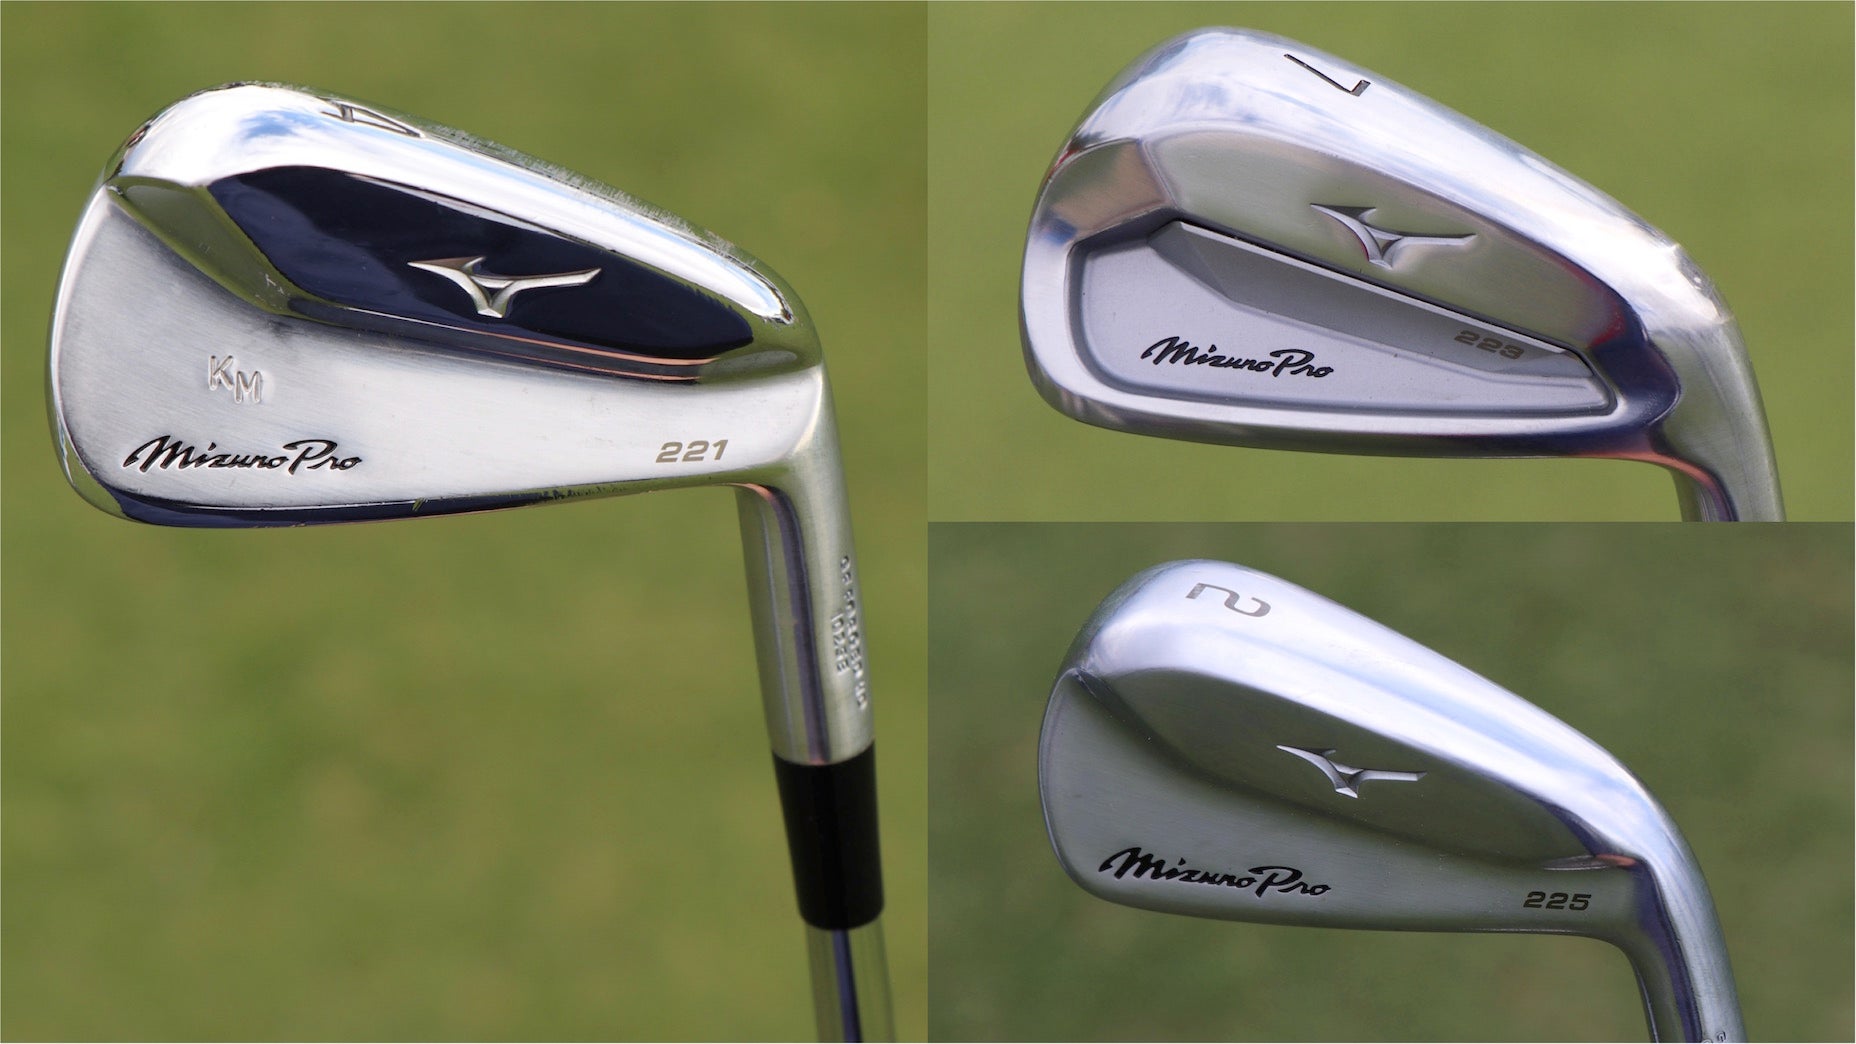 grot AIDS Zending Unreleased Mizuno Pro 221, 223 and 225 irons: Check out in-hand photos